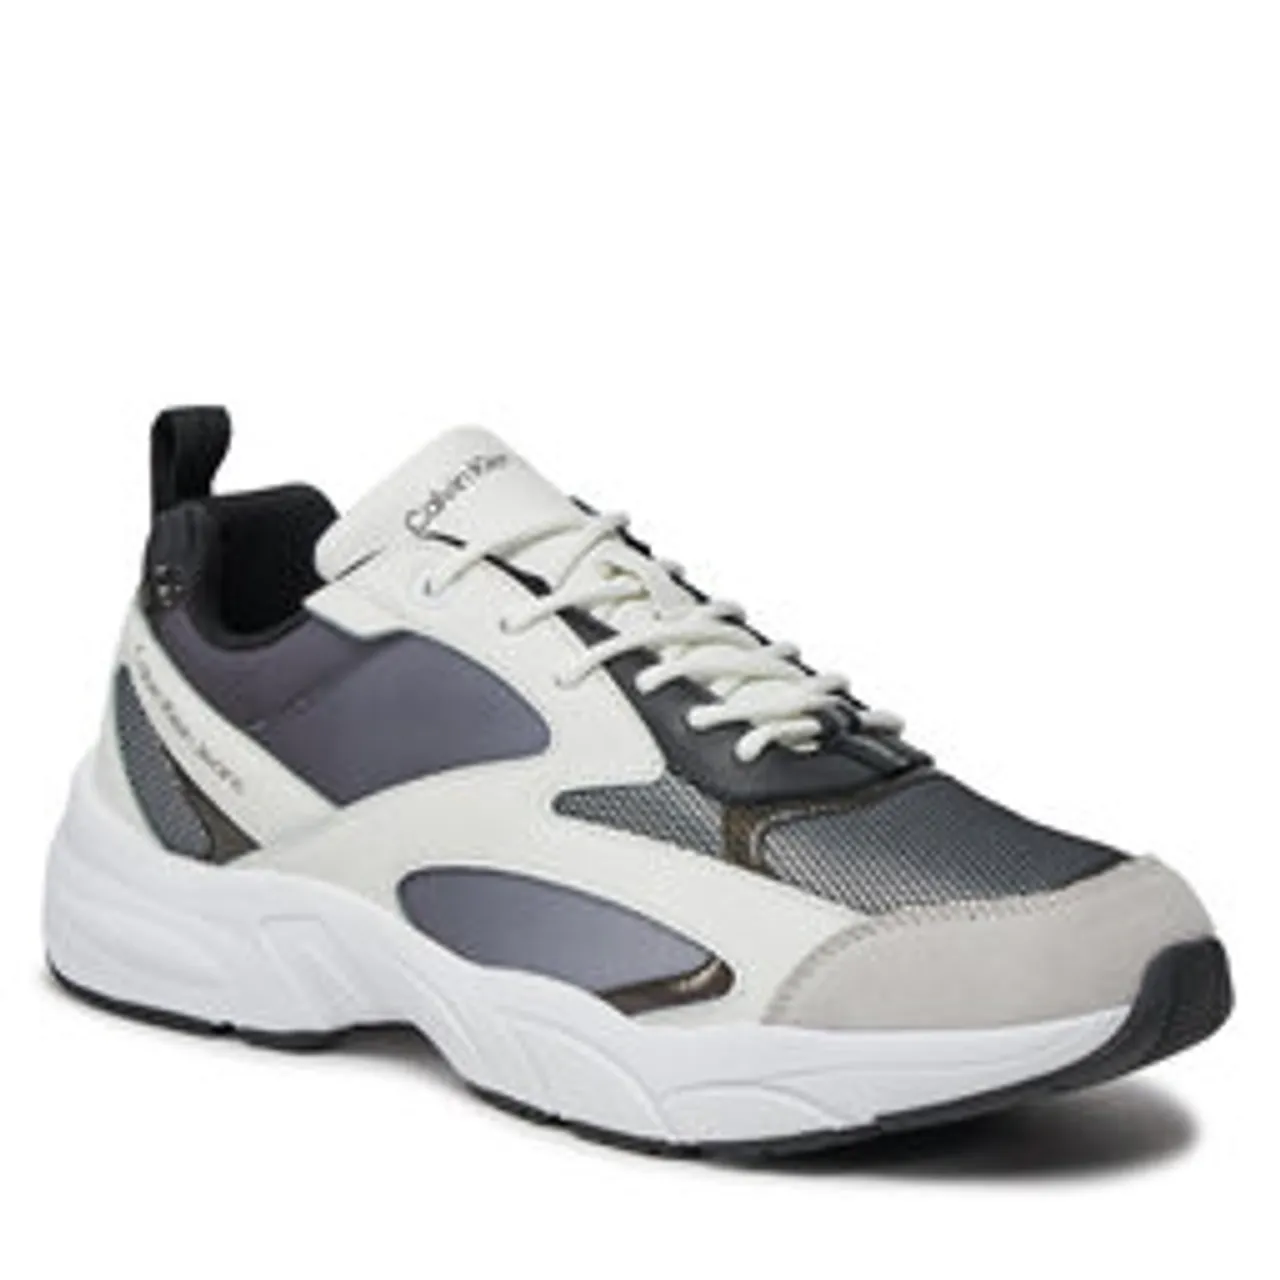 Sneakers Calvin Klein Jeans Retro Tennis Low Mix In Sat YM0YM00877 Black/Bright White 0GM